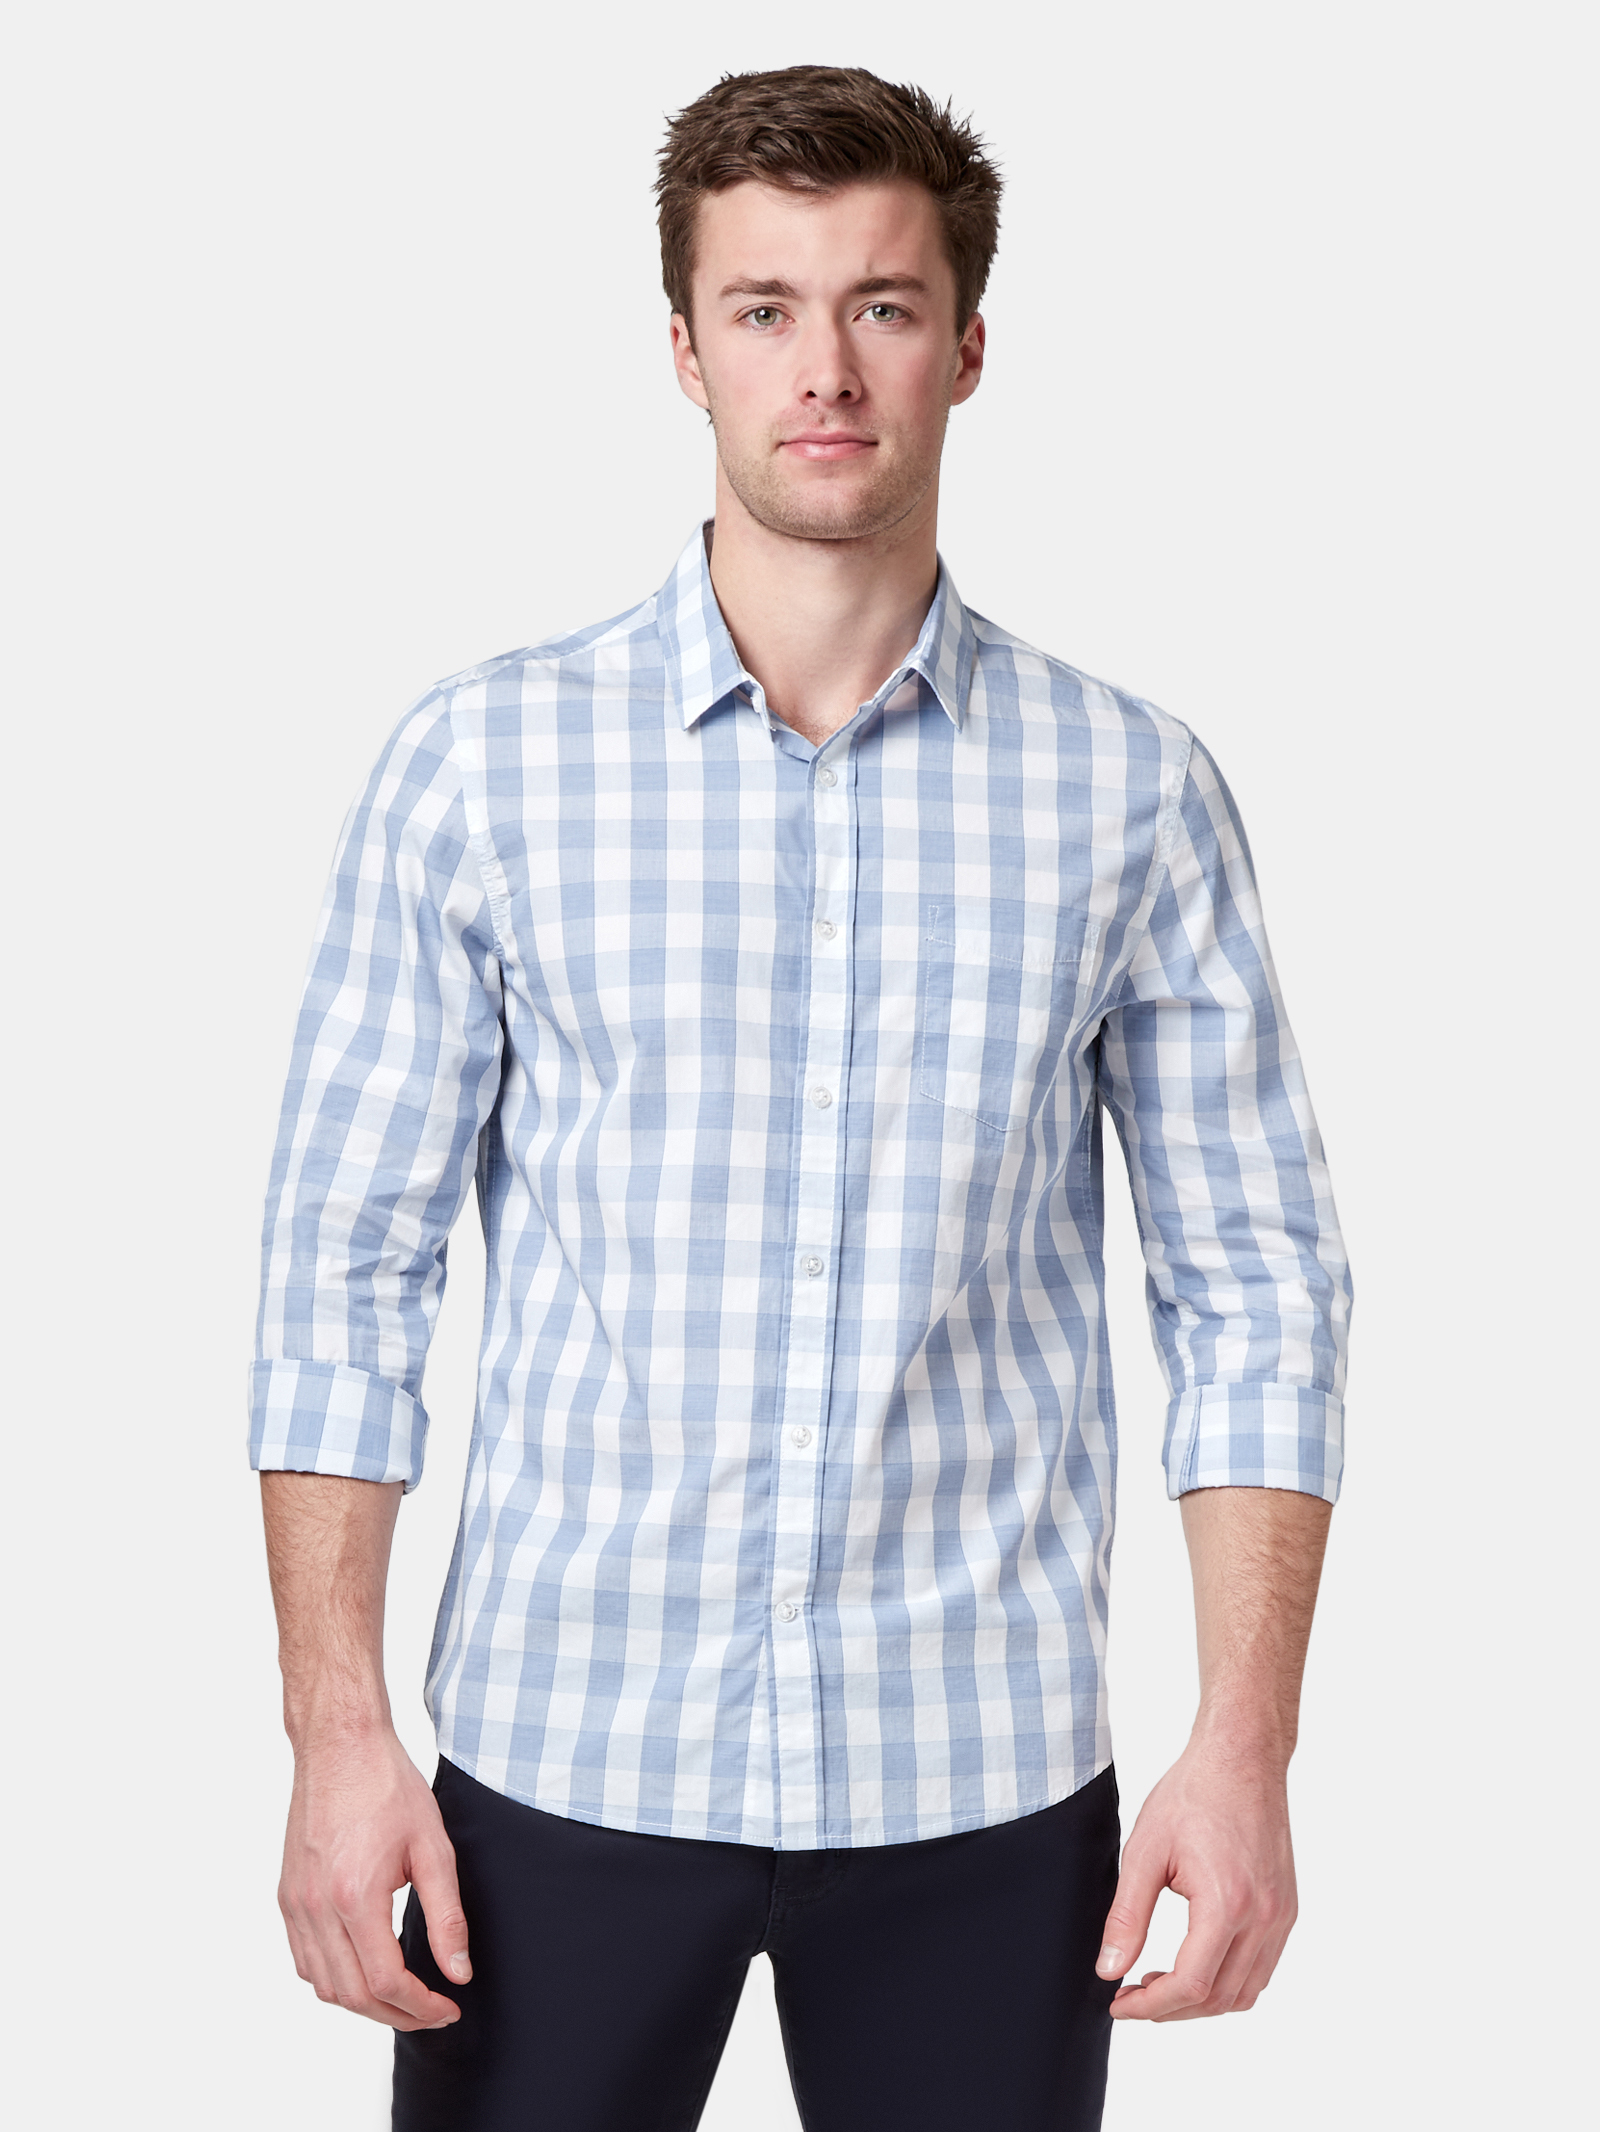 Ollie Long Sleeve Check Shirt | Jeanswest